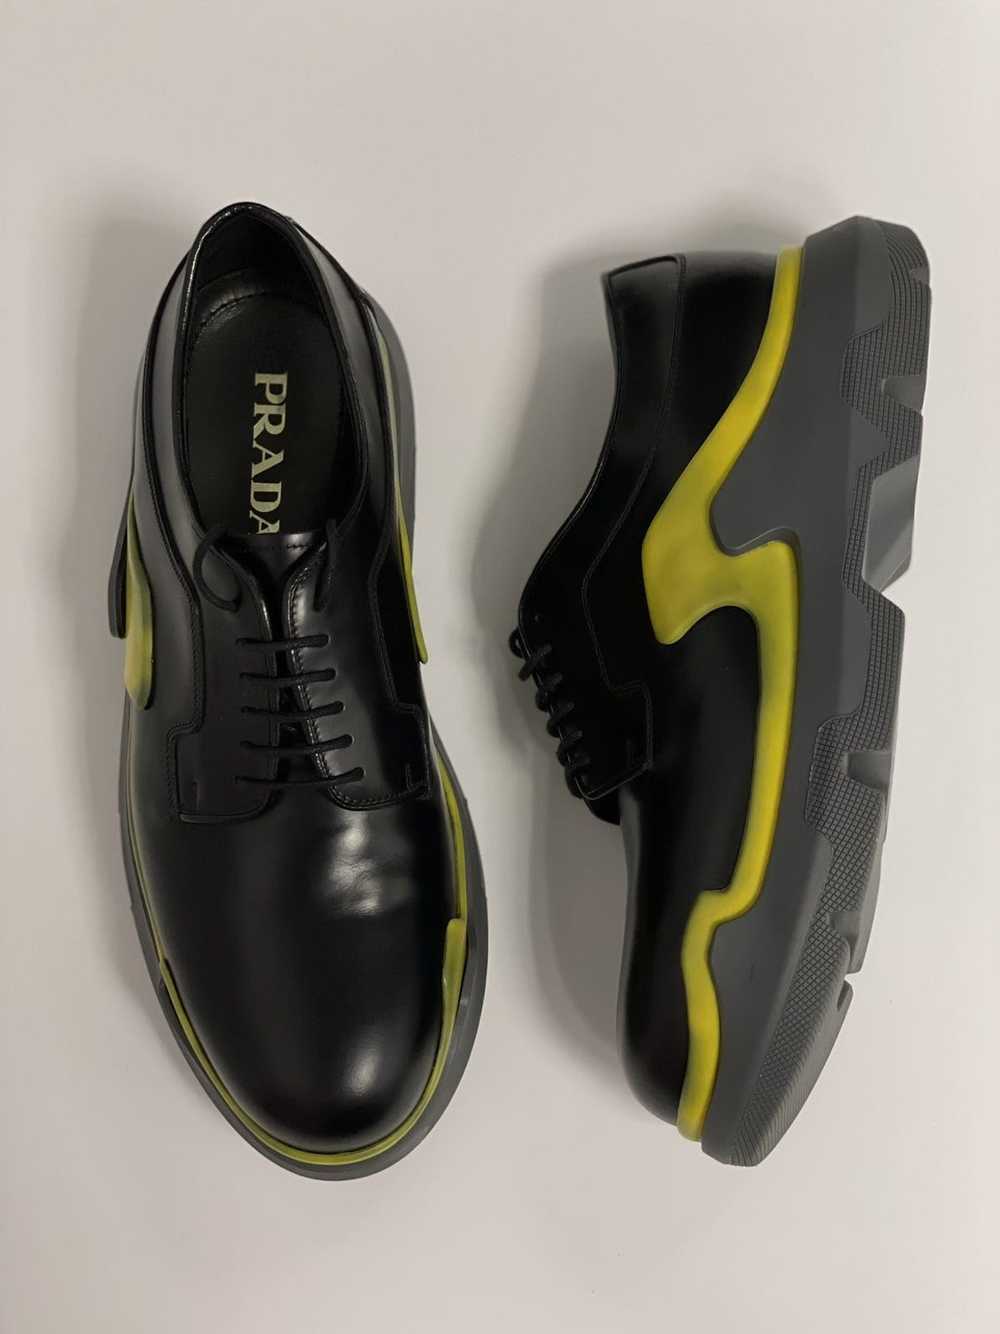 Prada Heavy-Duty Rubber Sole Leather Lace-up Shoes - image 7